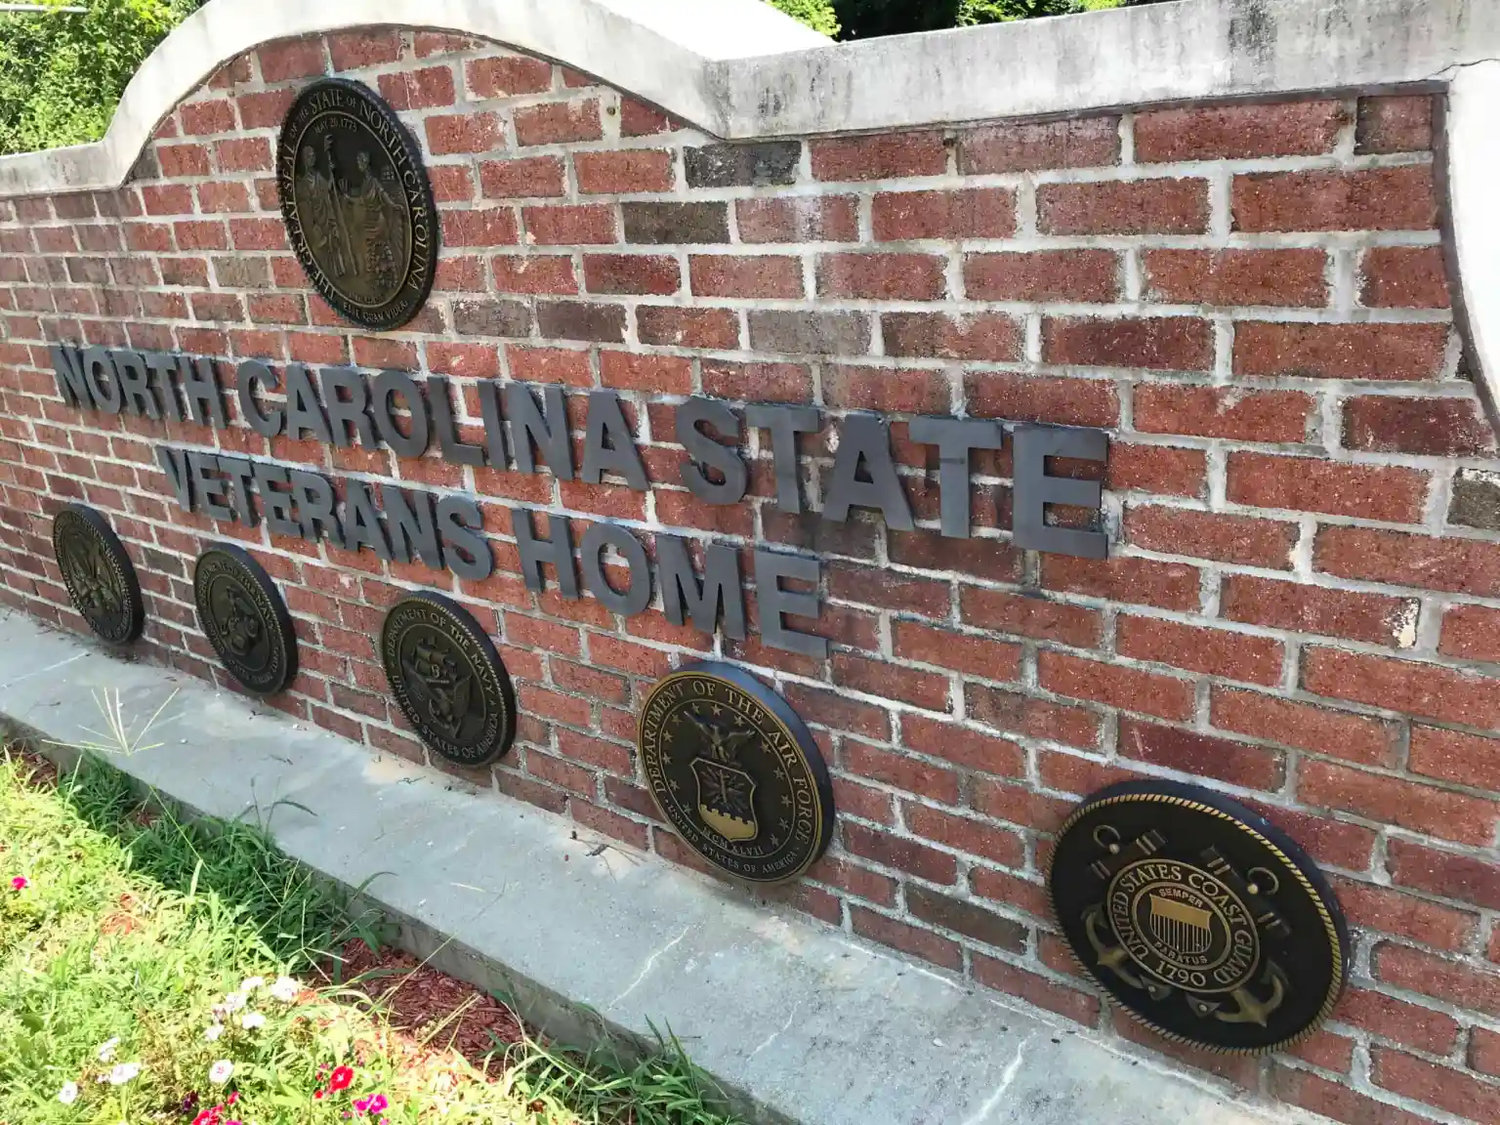 The North Carolina State Veterans Nursing Home in Fayetteville displays icons of the U.S. military branches of service. The facility went through a COVID-19 outbreak that killed 20 veterans who were living there.